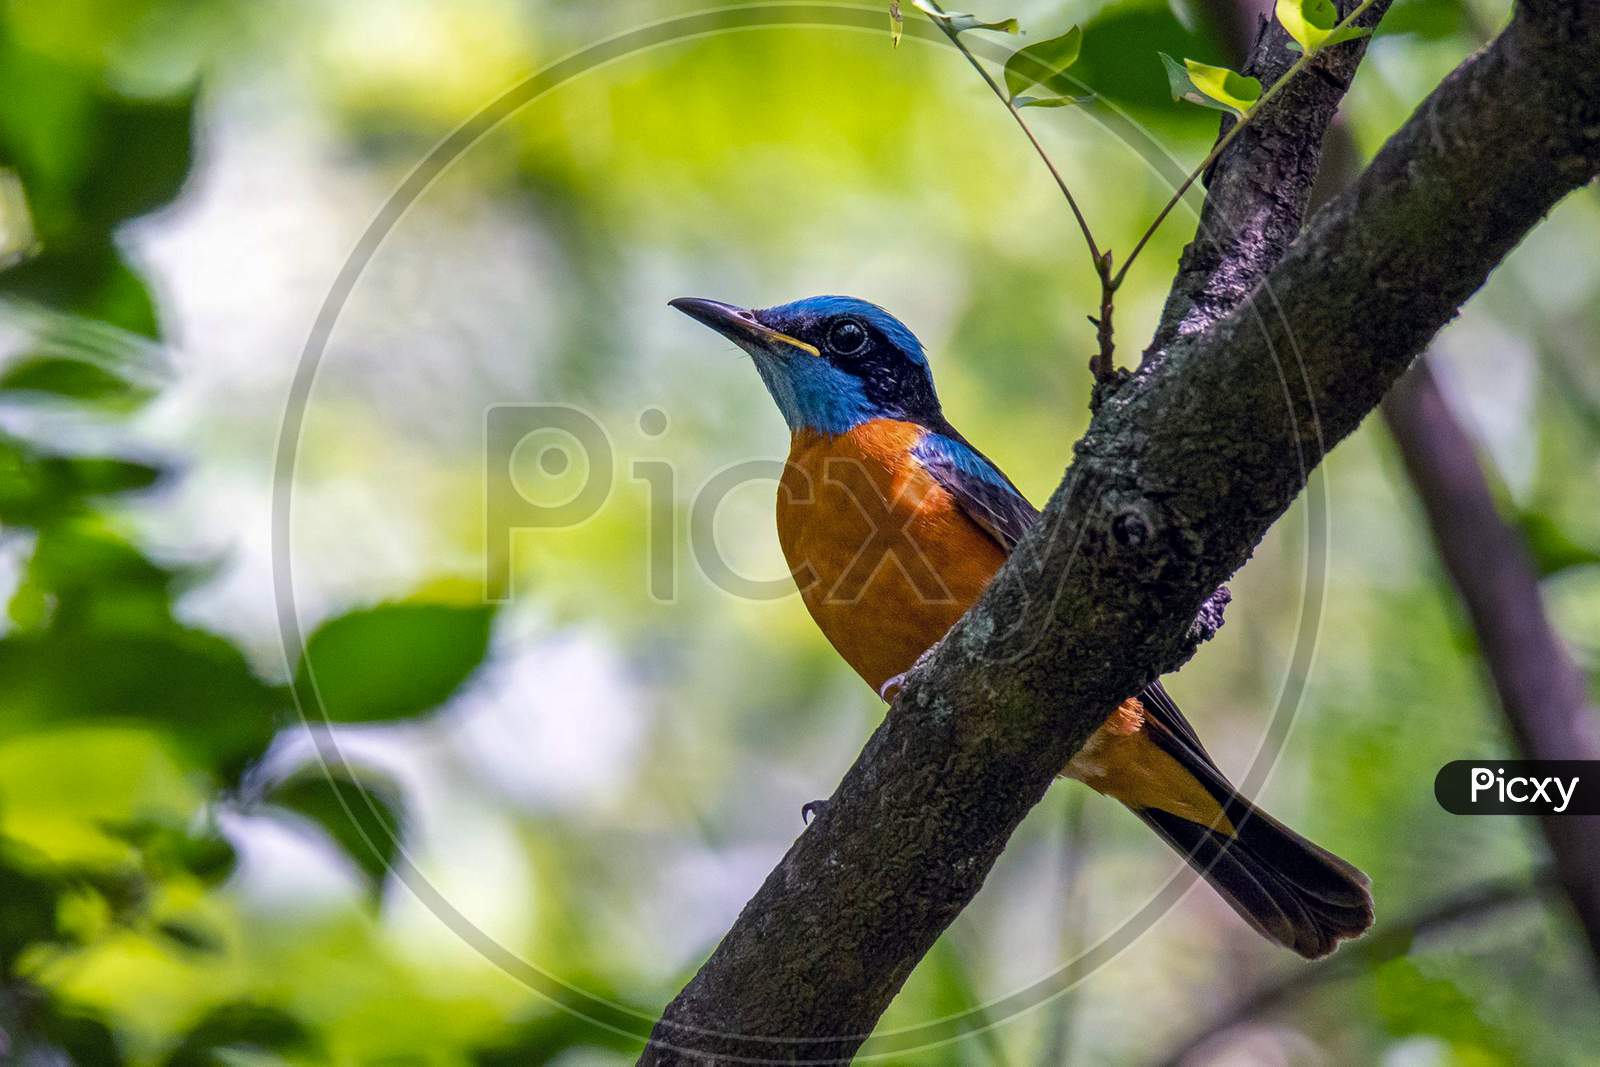 The Blue-Capped Rock Thrush Is A Species Of Chat.